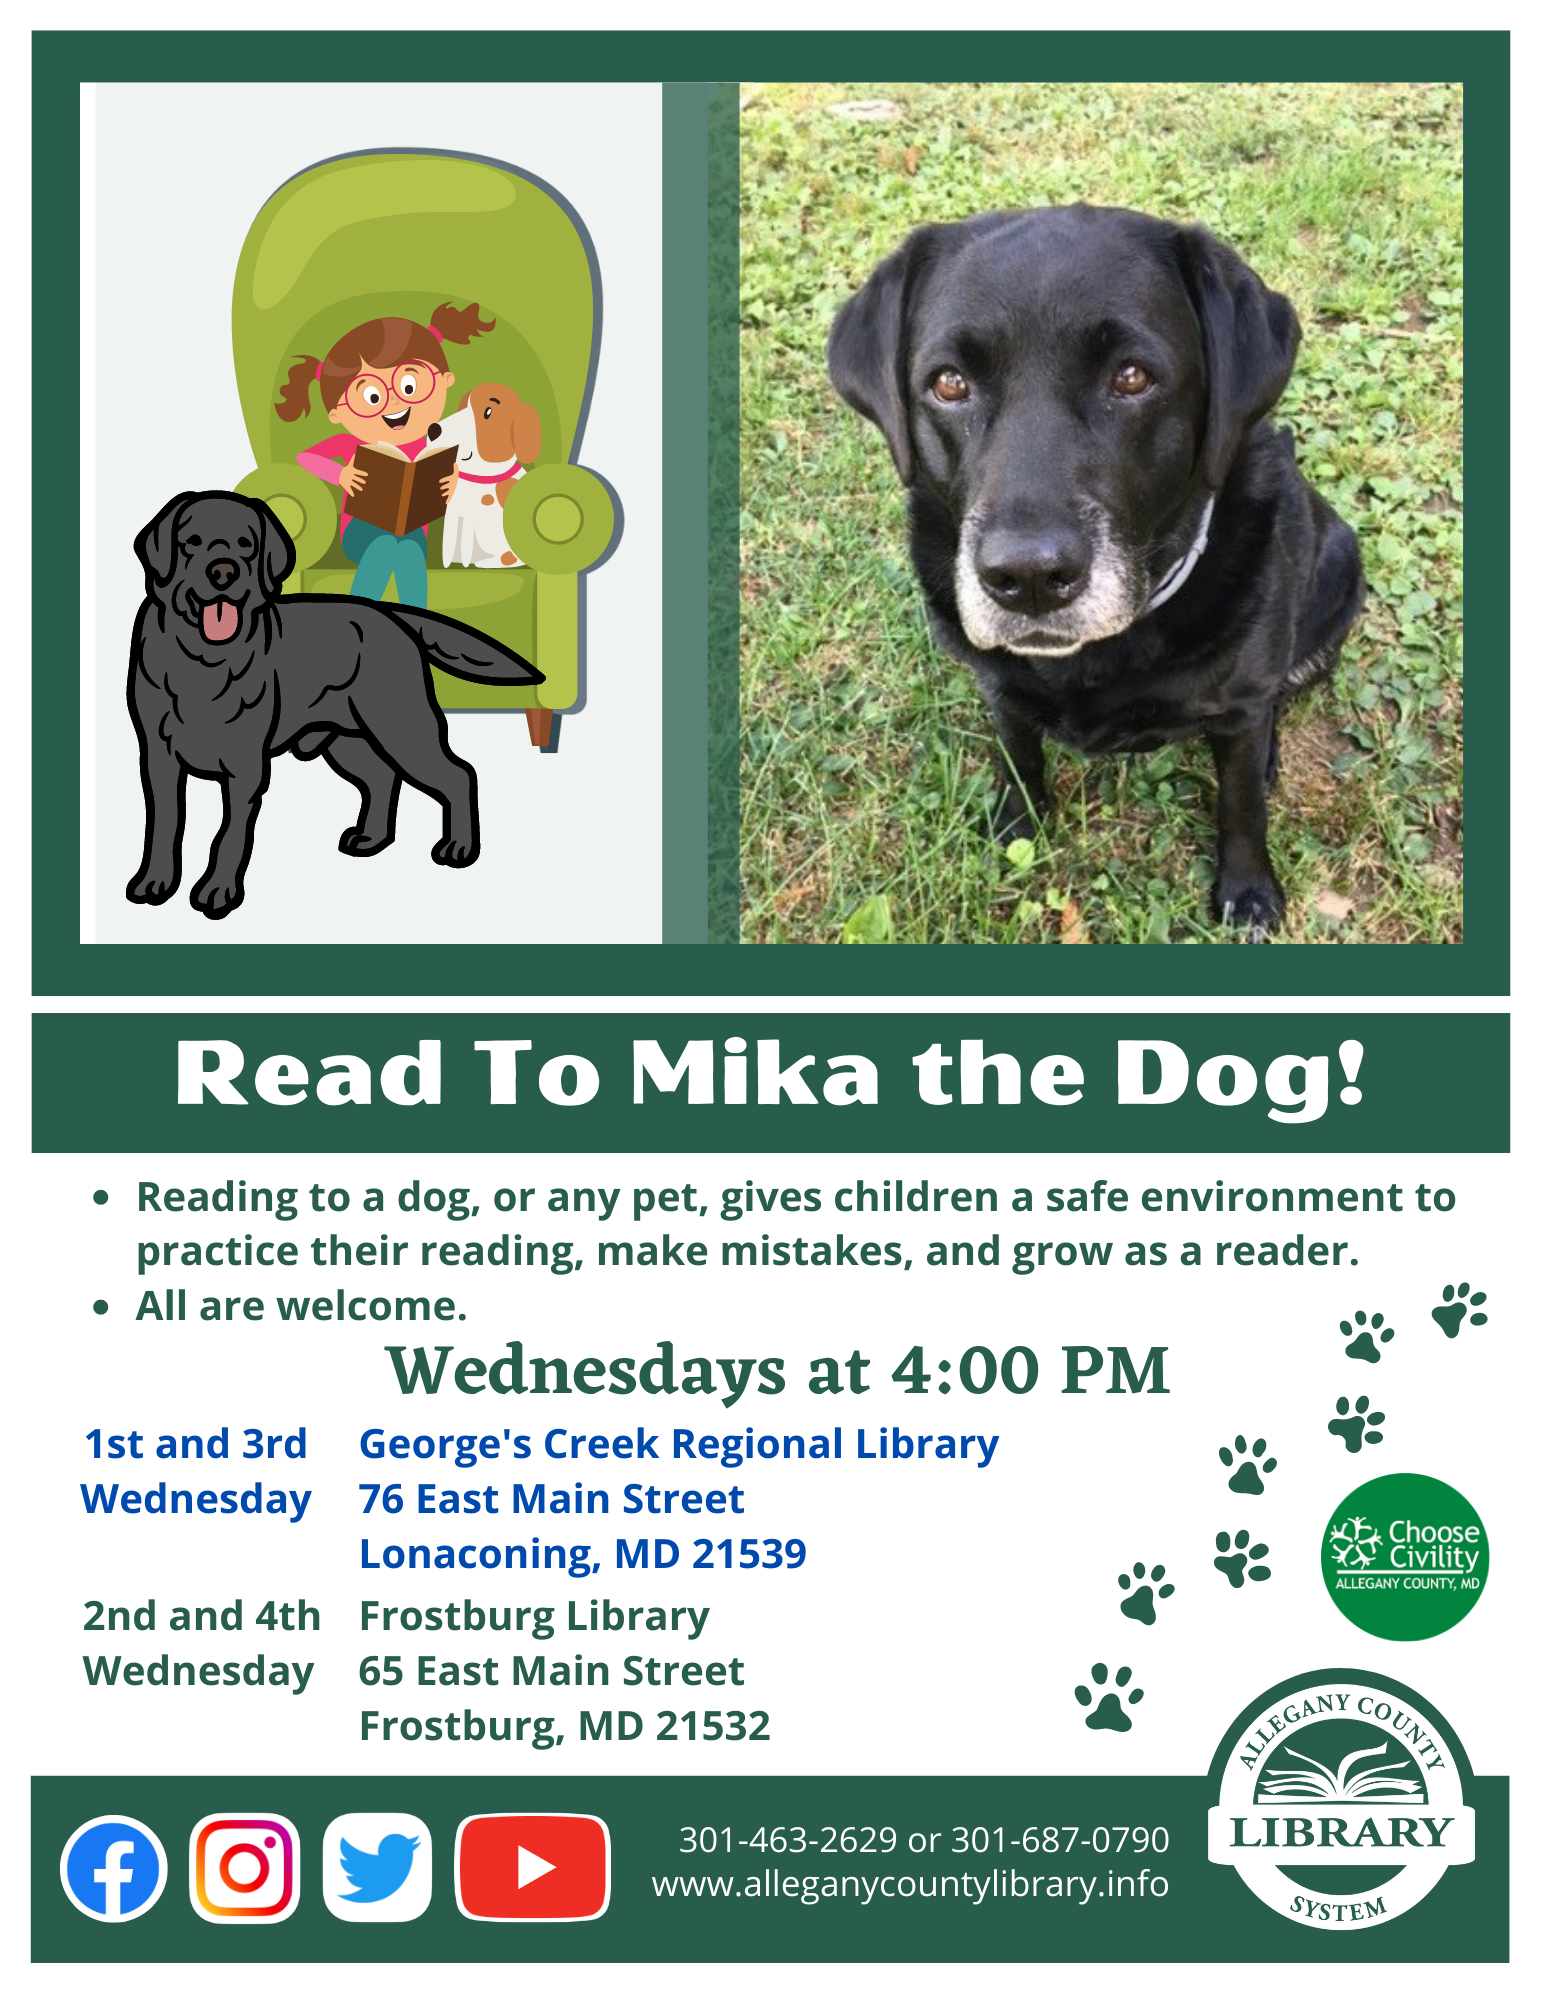 Picture of Mika the black lab with event details